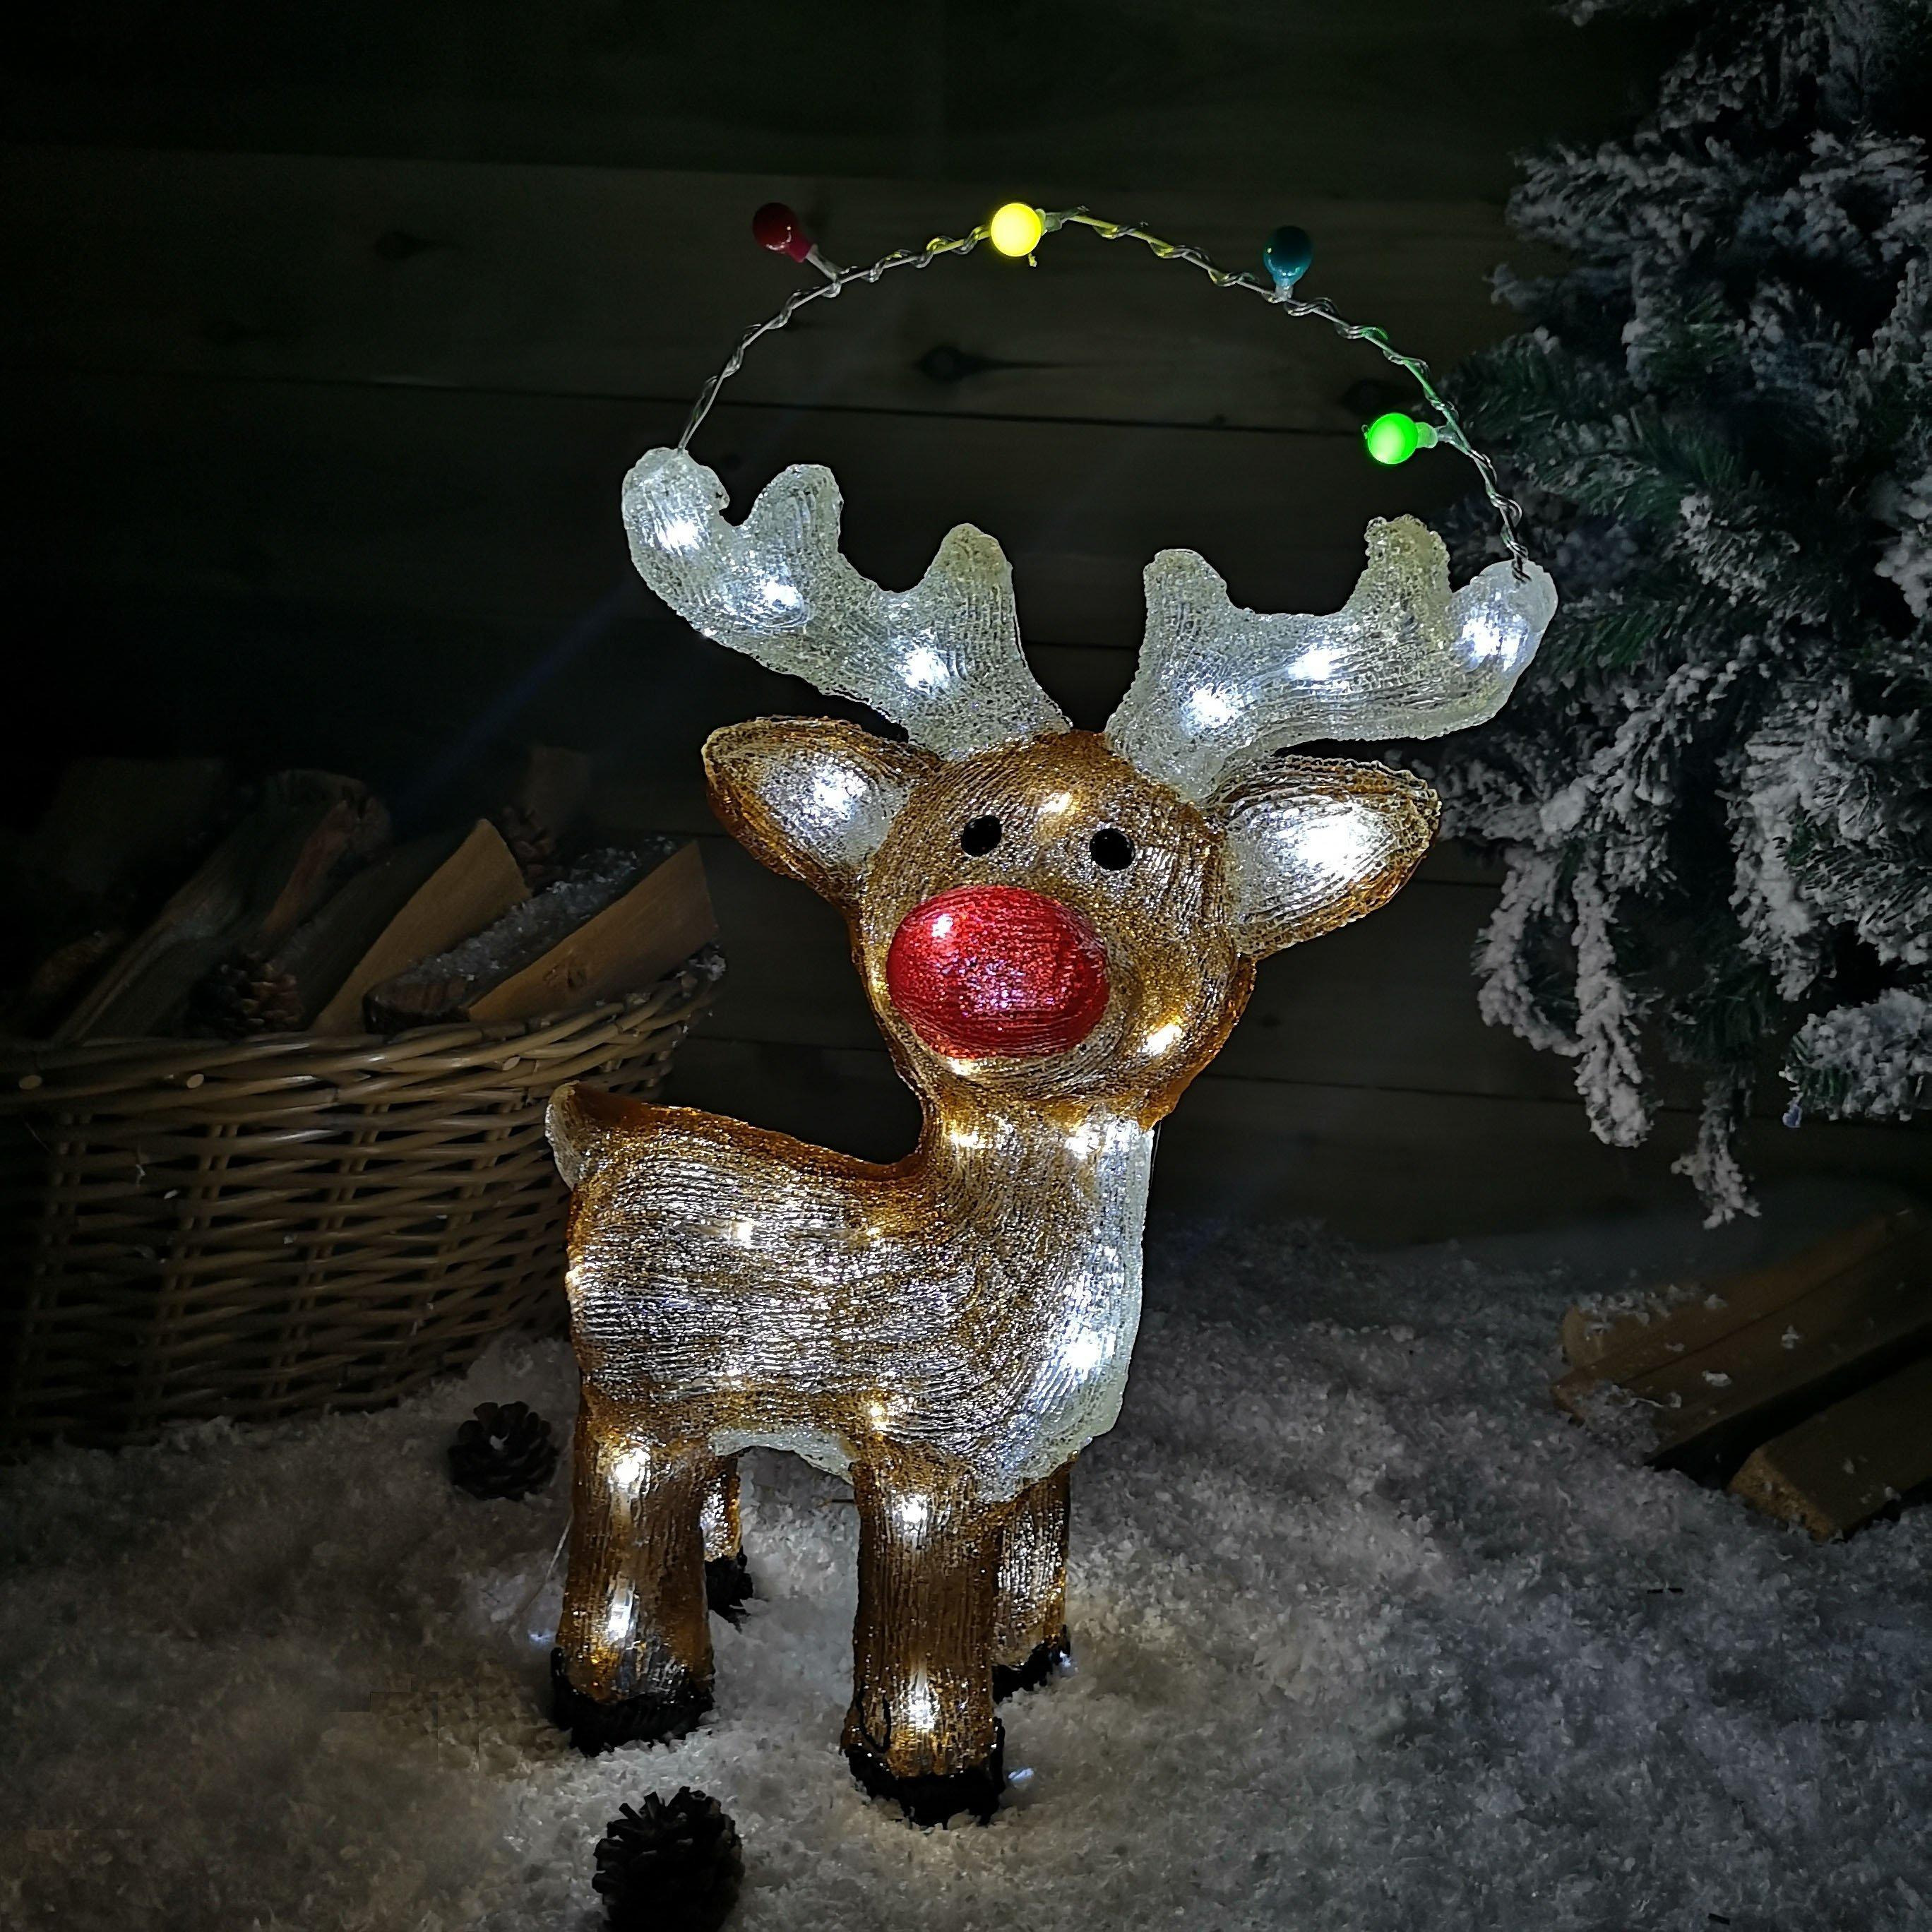 50cm Indoor Outdoor Acrylic Reindeer Decoration with Cool White LEDs and Flashing Headdress - image 1